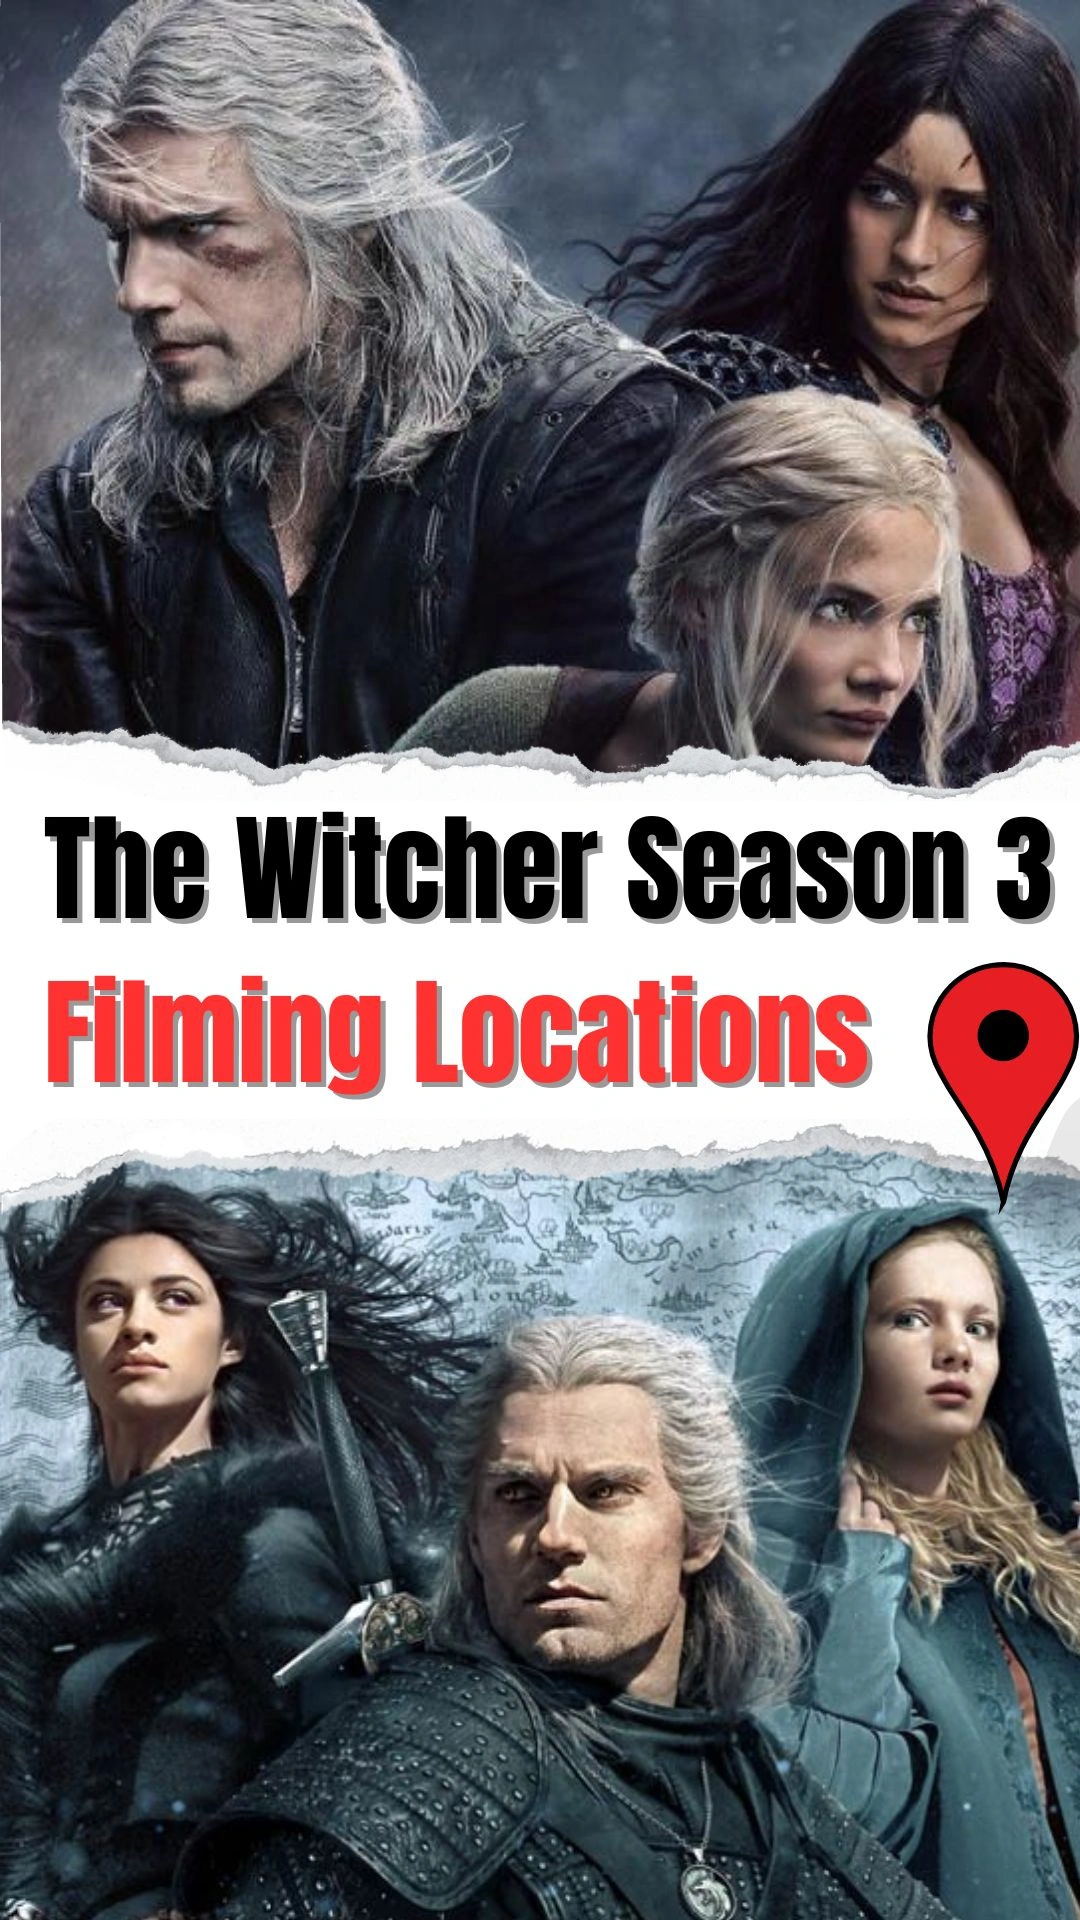 The Witcher Season 3 Filming Locations